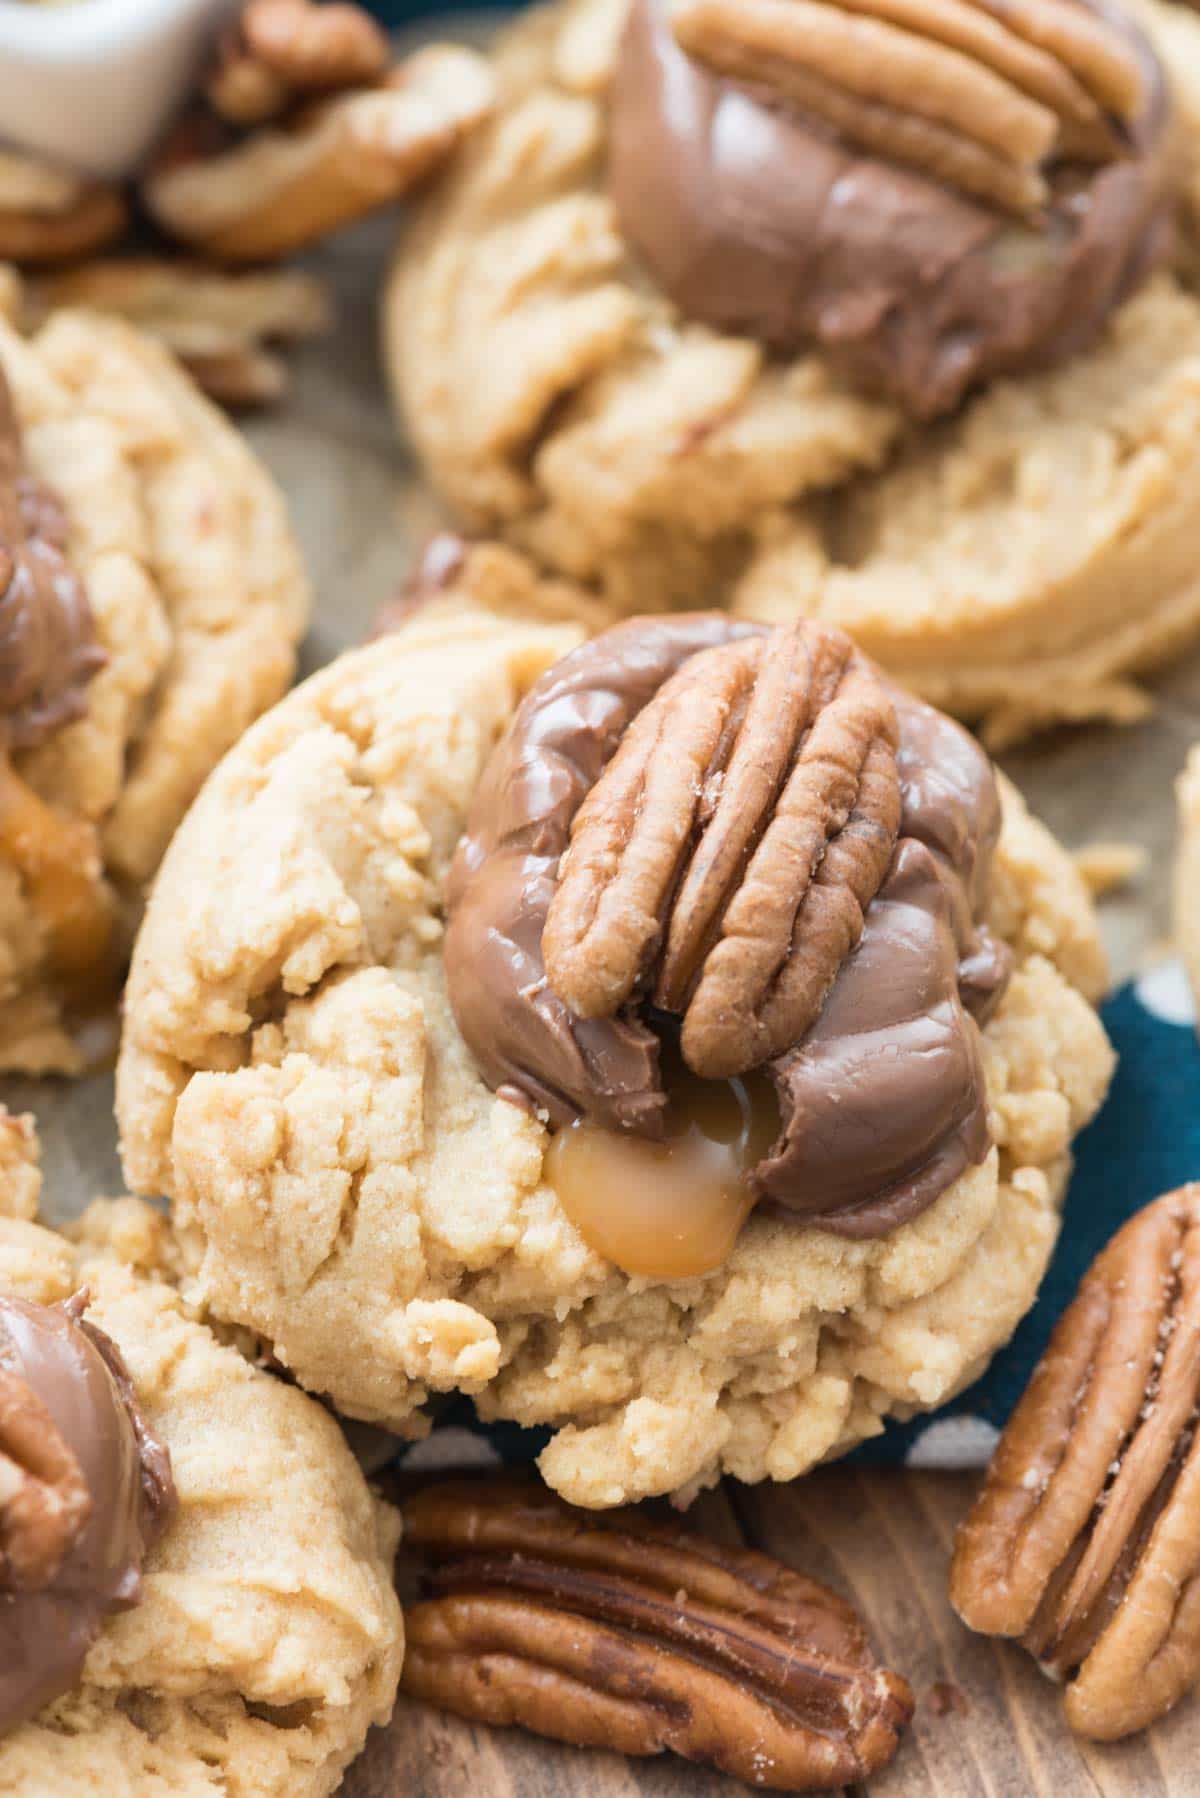 EASY Turtle Peanut Butter Cookies - this is my FAVORITE peanut butter cookie recipe topped with a caramel candy and a pecan. The easiest way to dress up a peanut butter cookie!